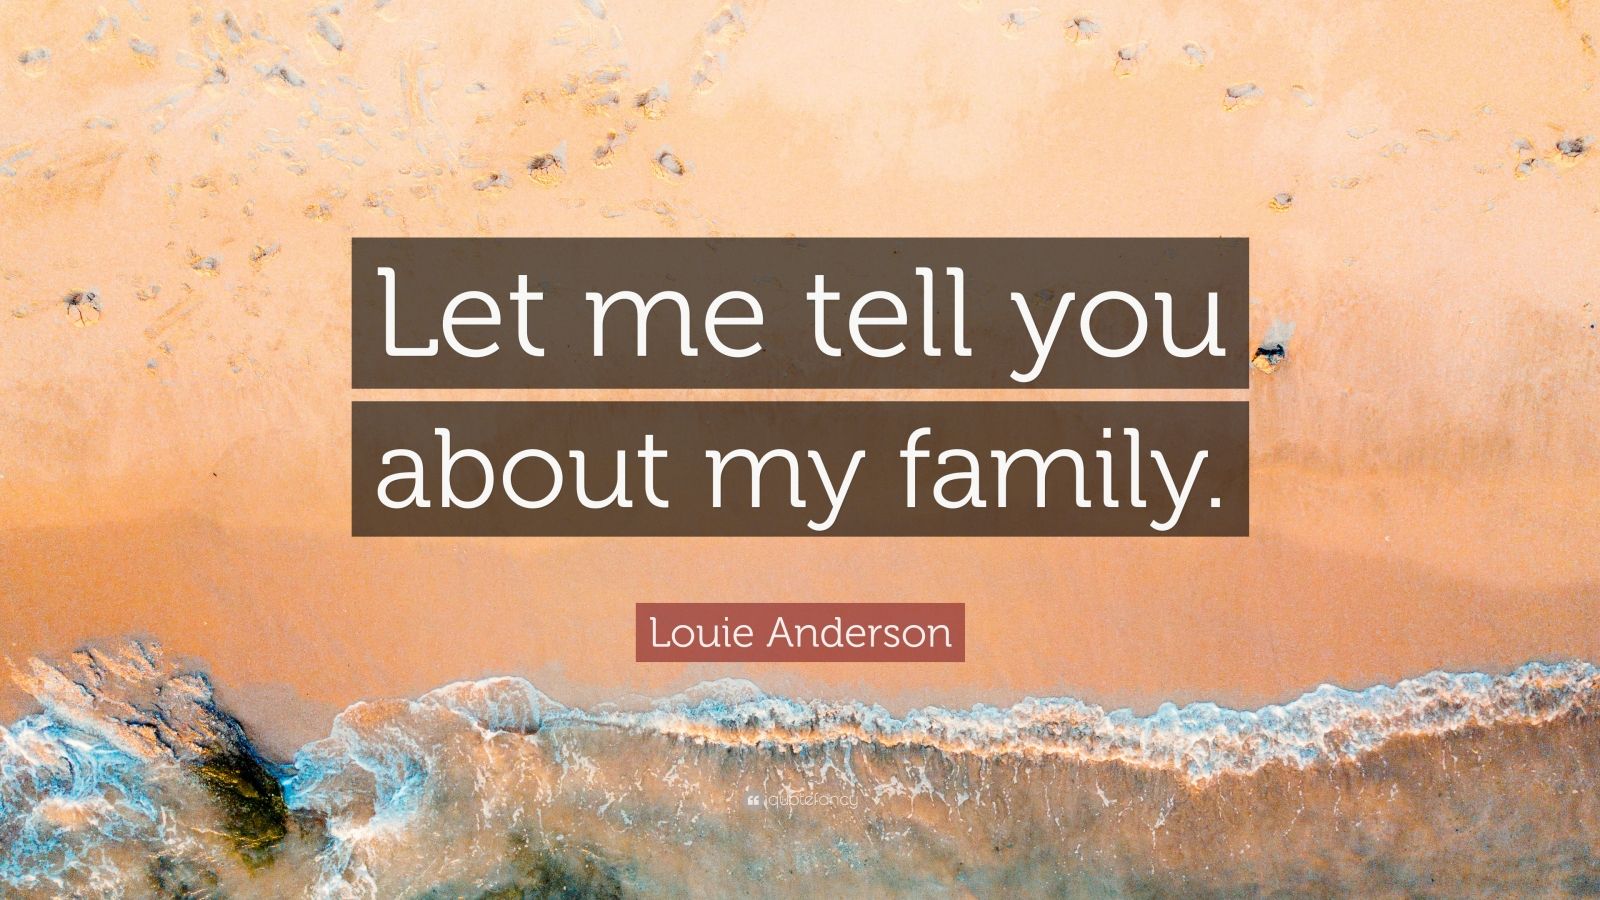 Louie Anderson Quote: “Let me tell you about my family.” (7 wallpapers ...